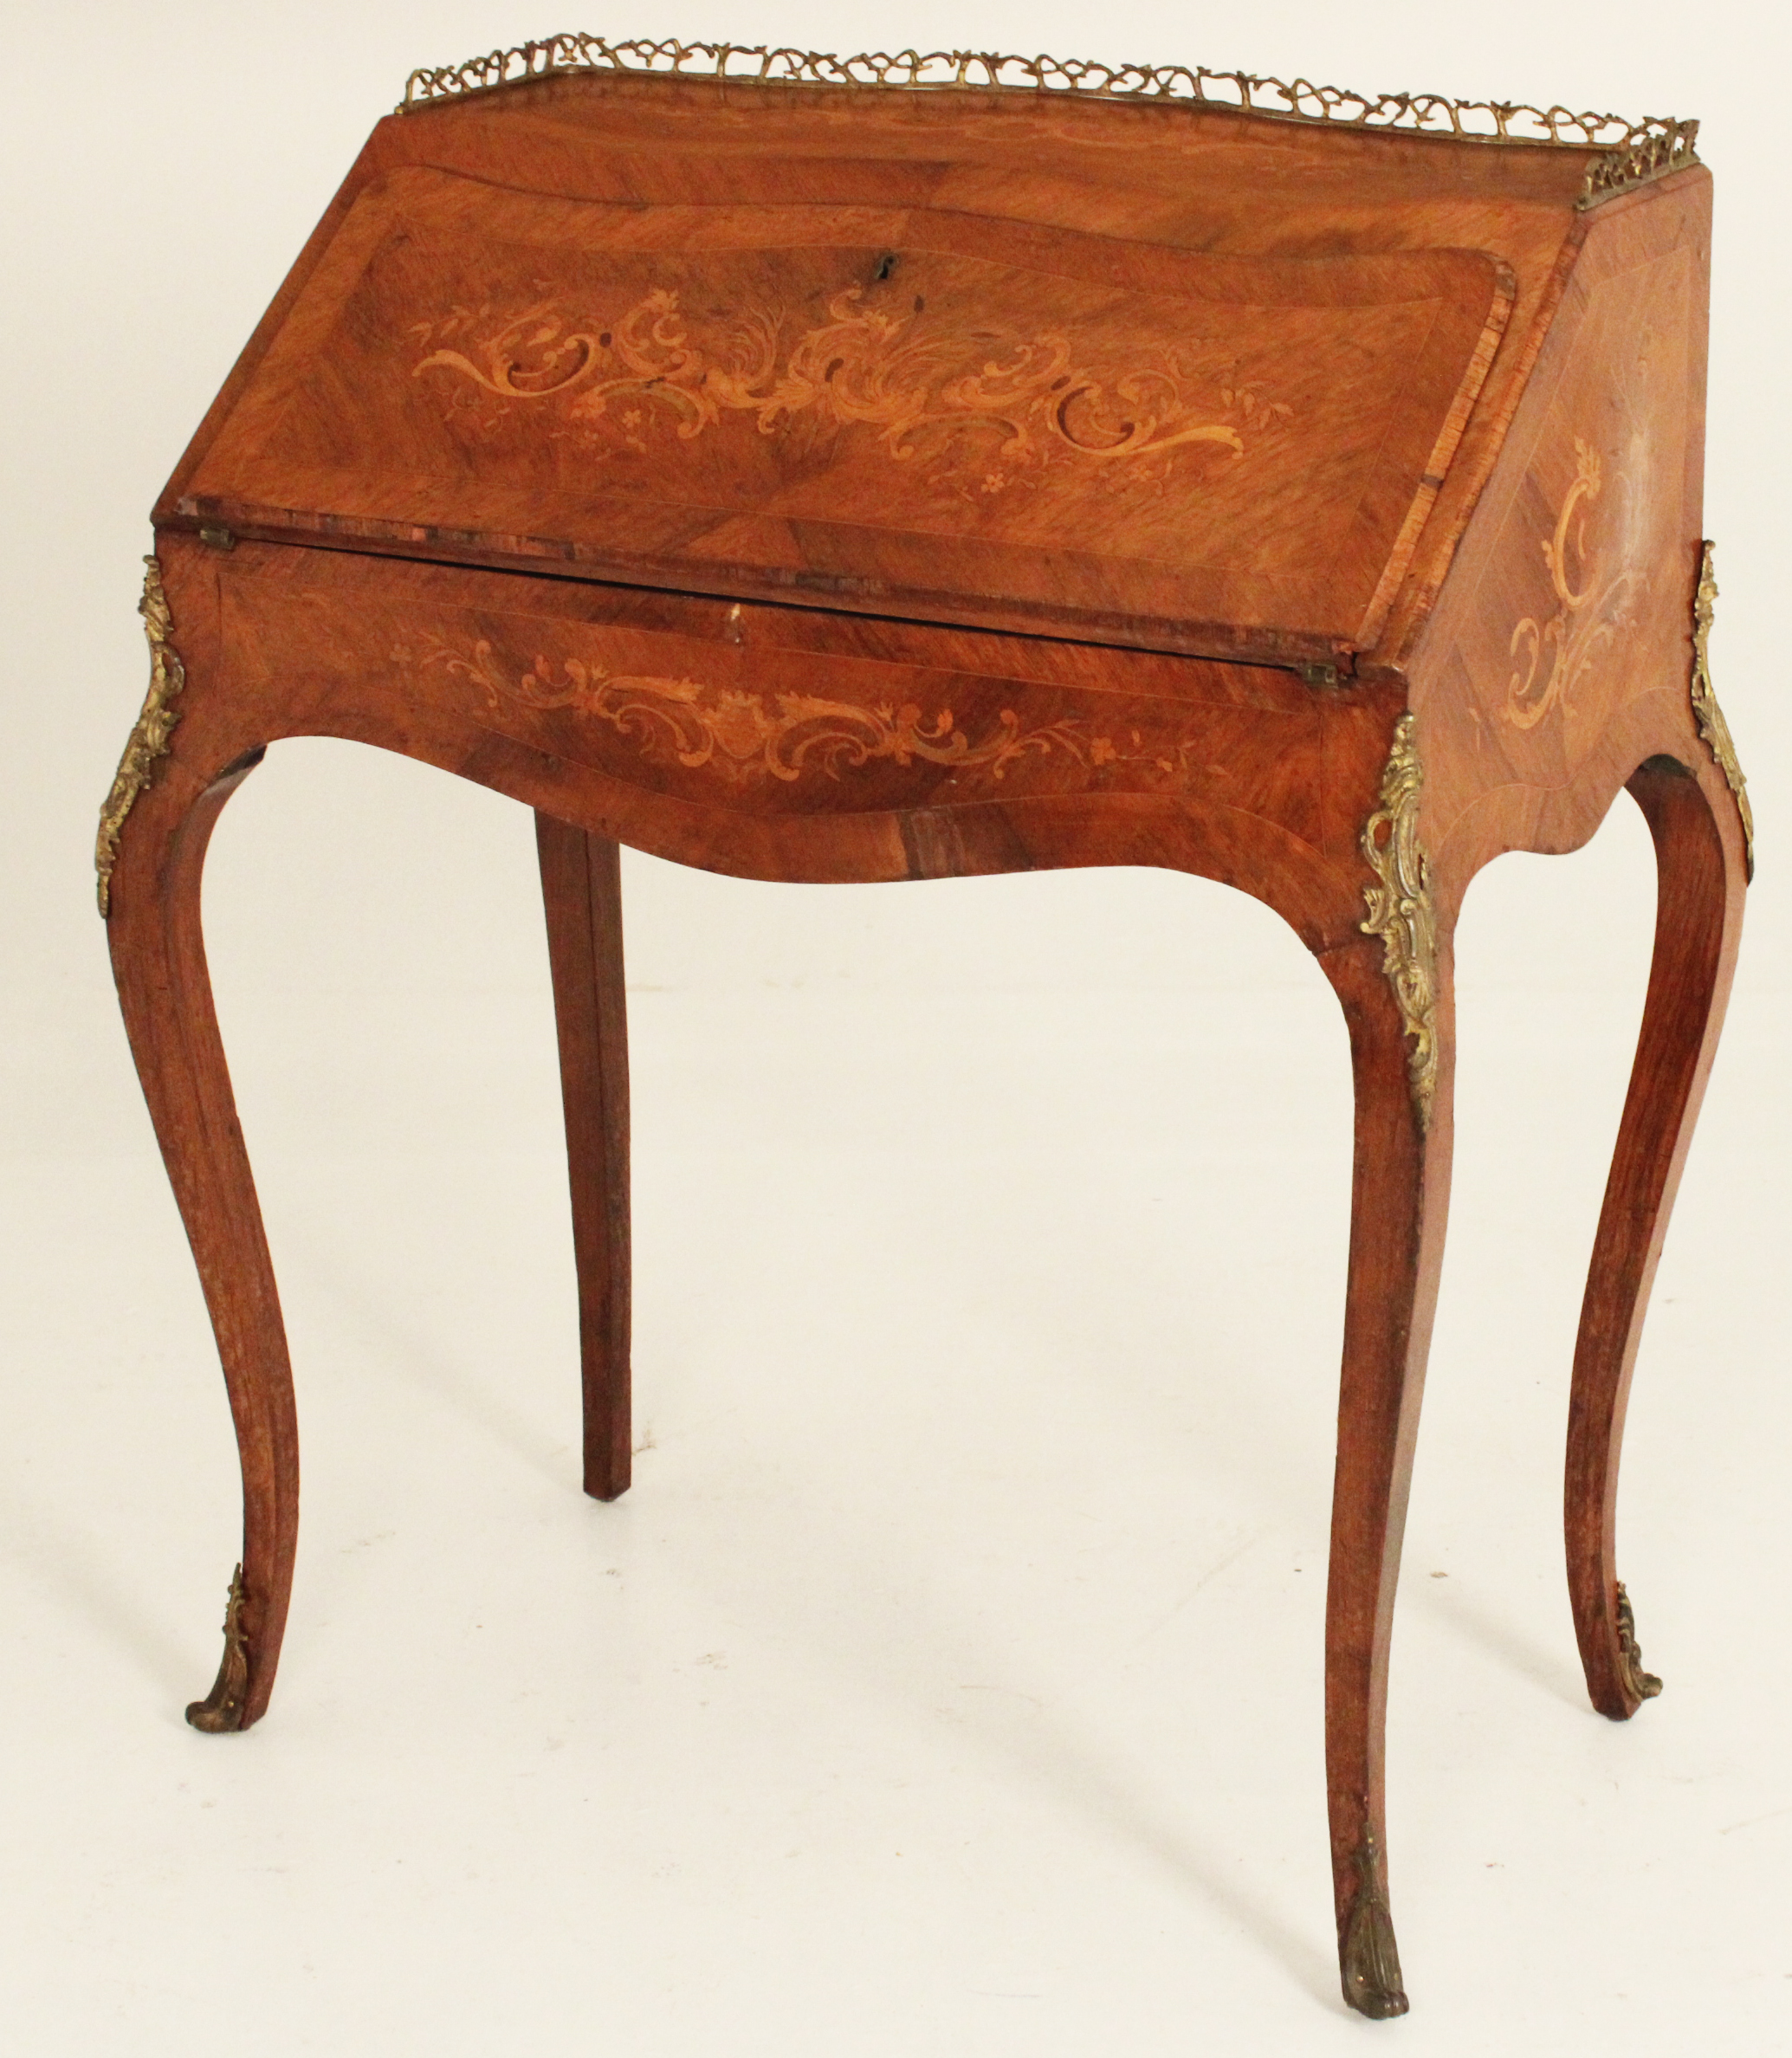 LOUIS XV STYLE MARQUETRY INLAID 35f33b